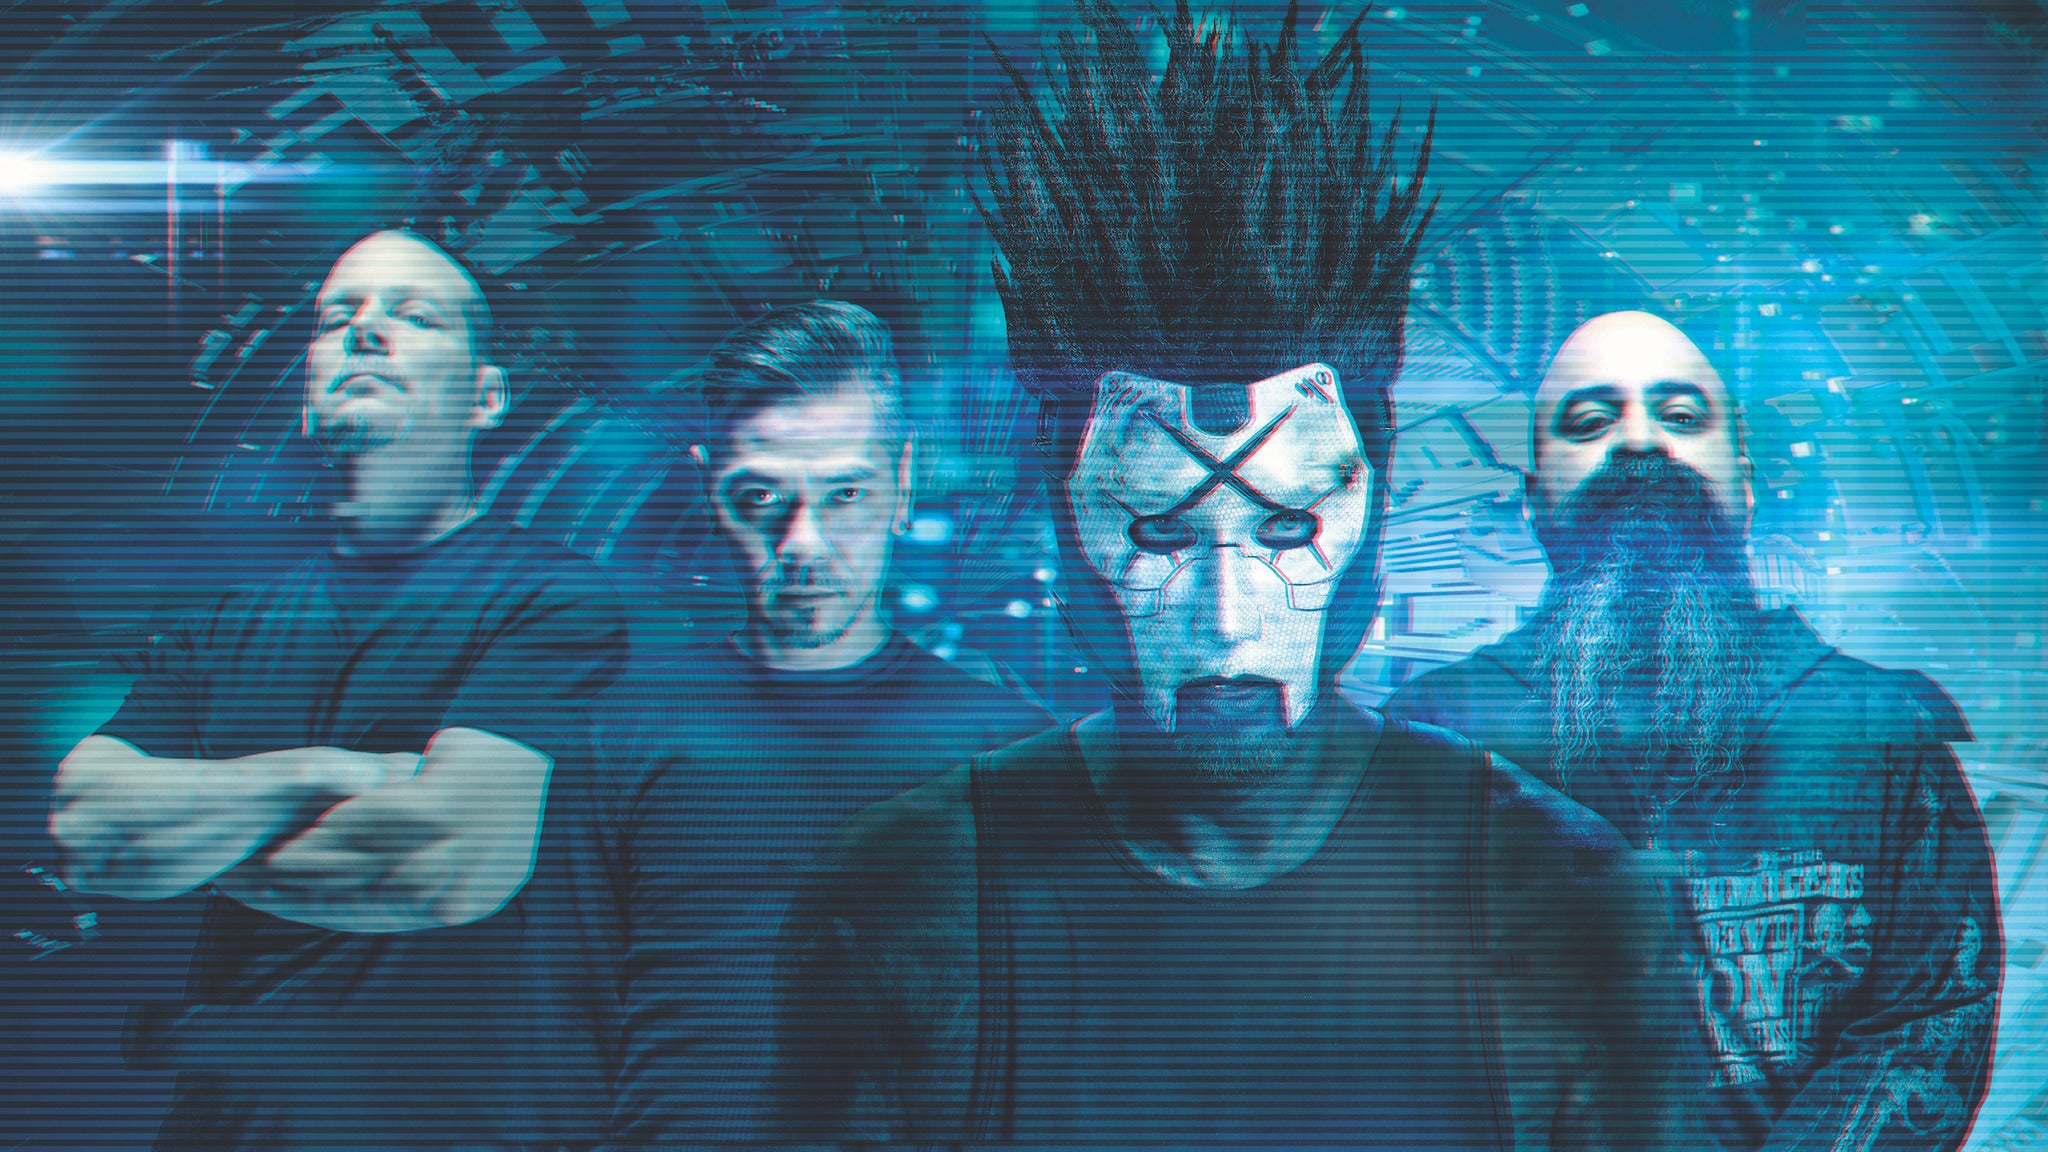 Static-X - Rise Of The Machine 2023 at Delmar Hall